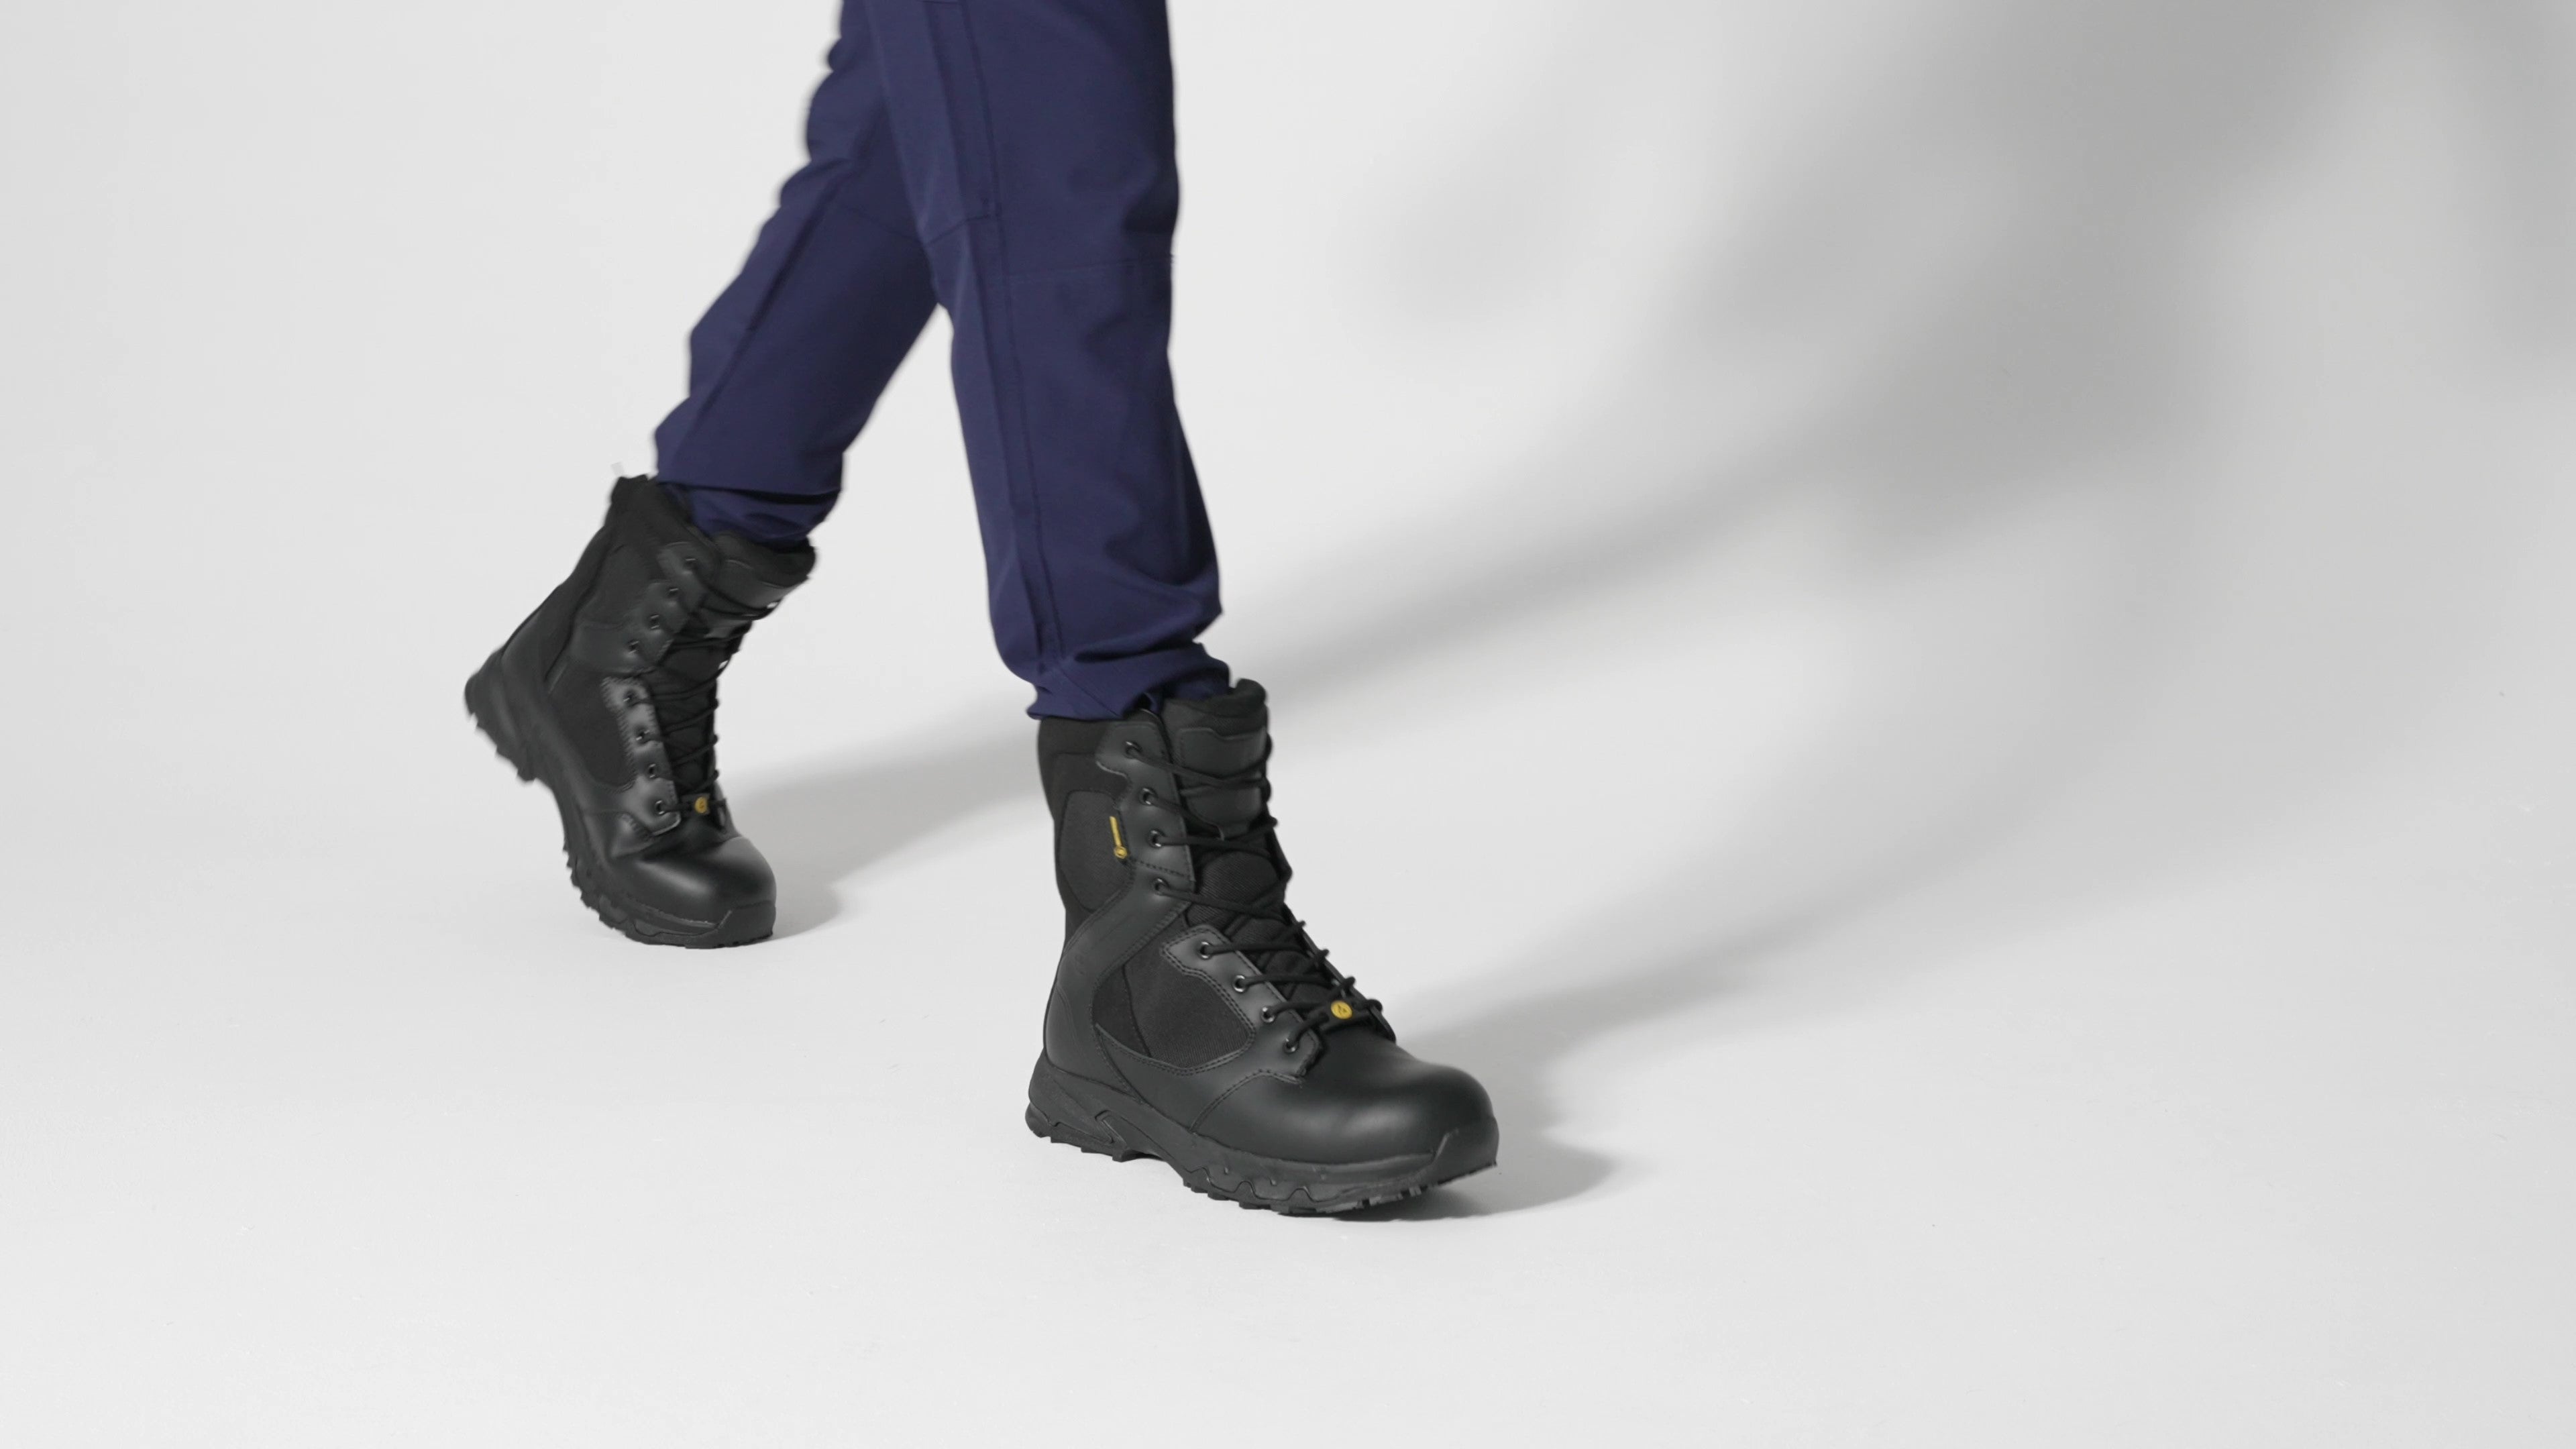 The Defence High from Shoes For Crews are waterproof, slip-resistant safety boots, product video.